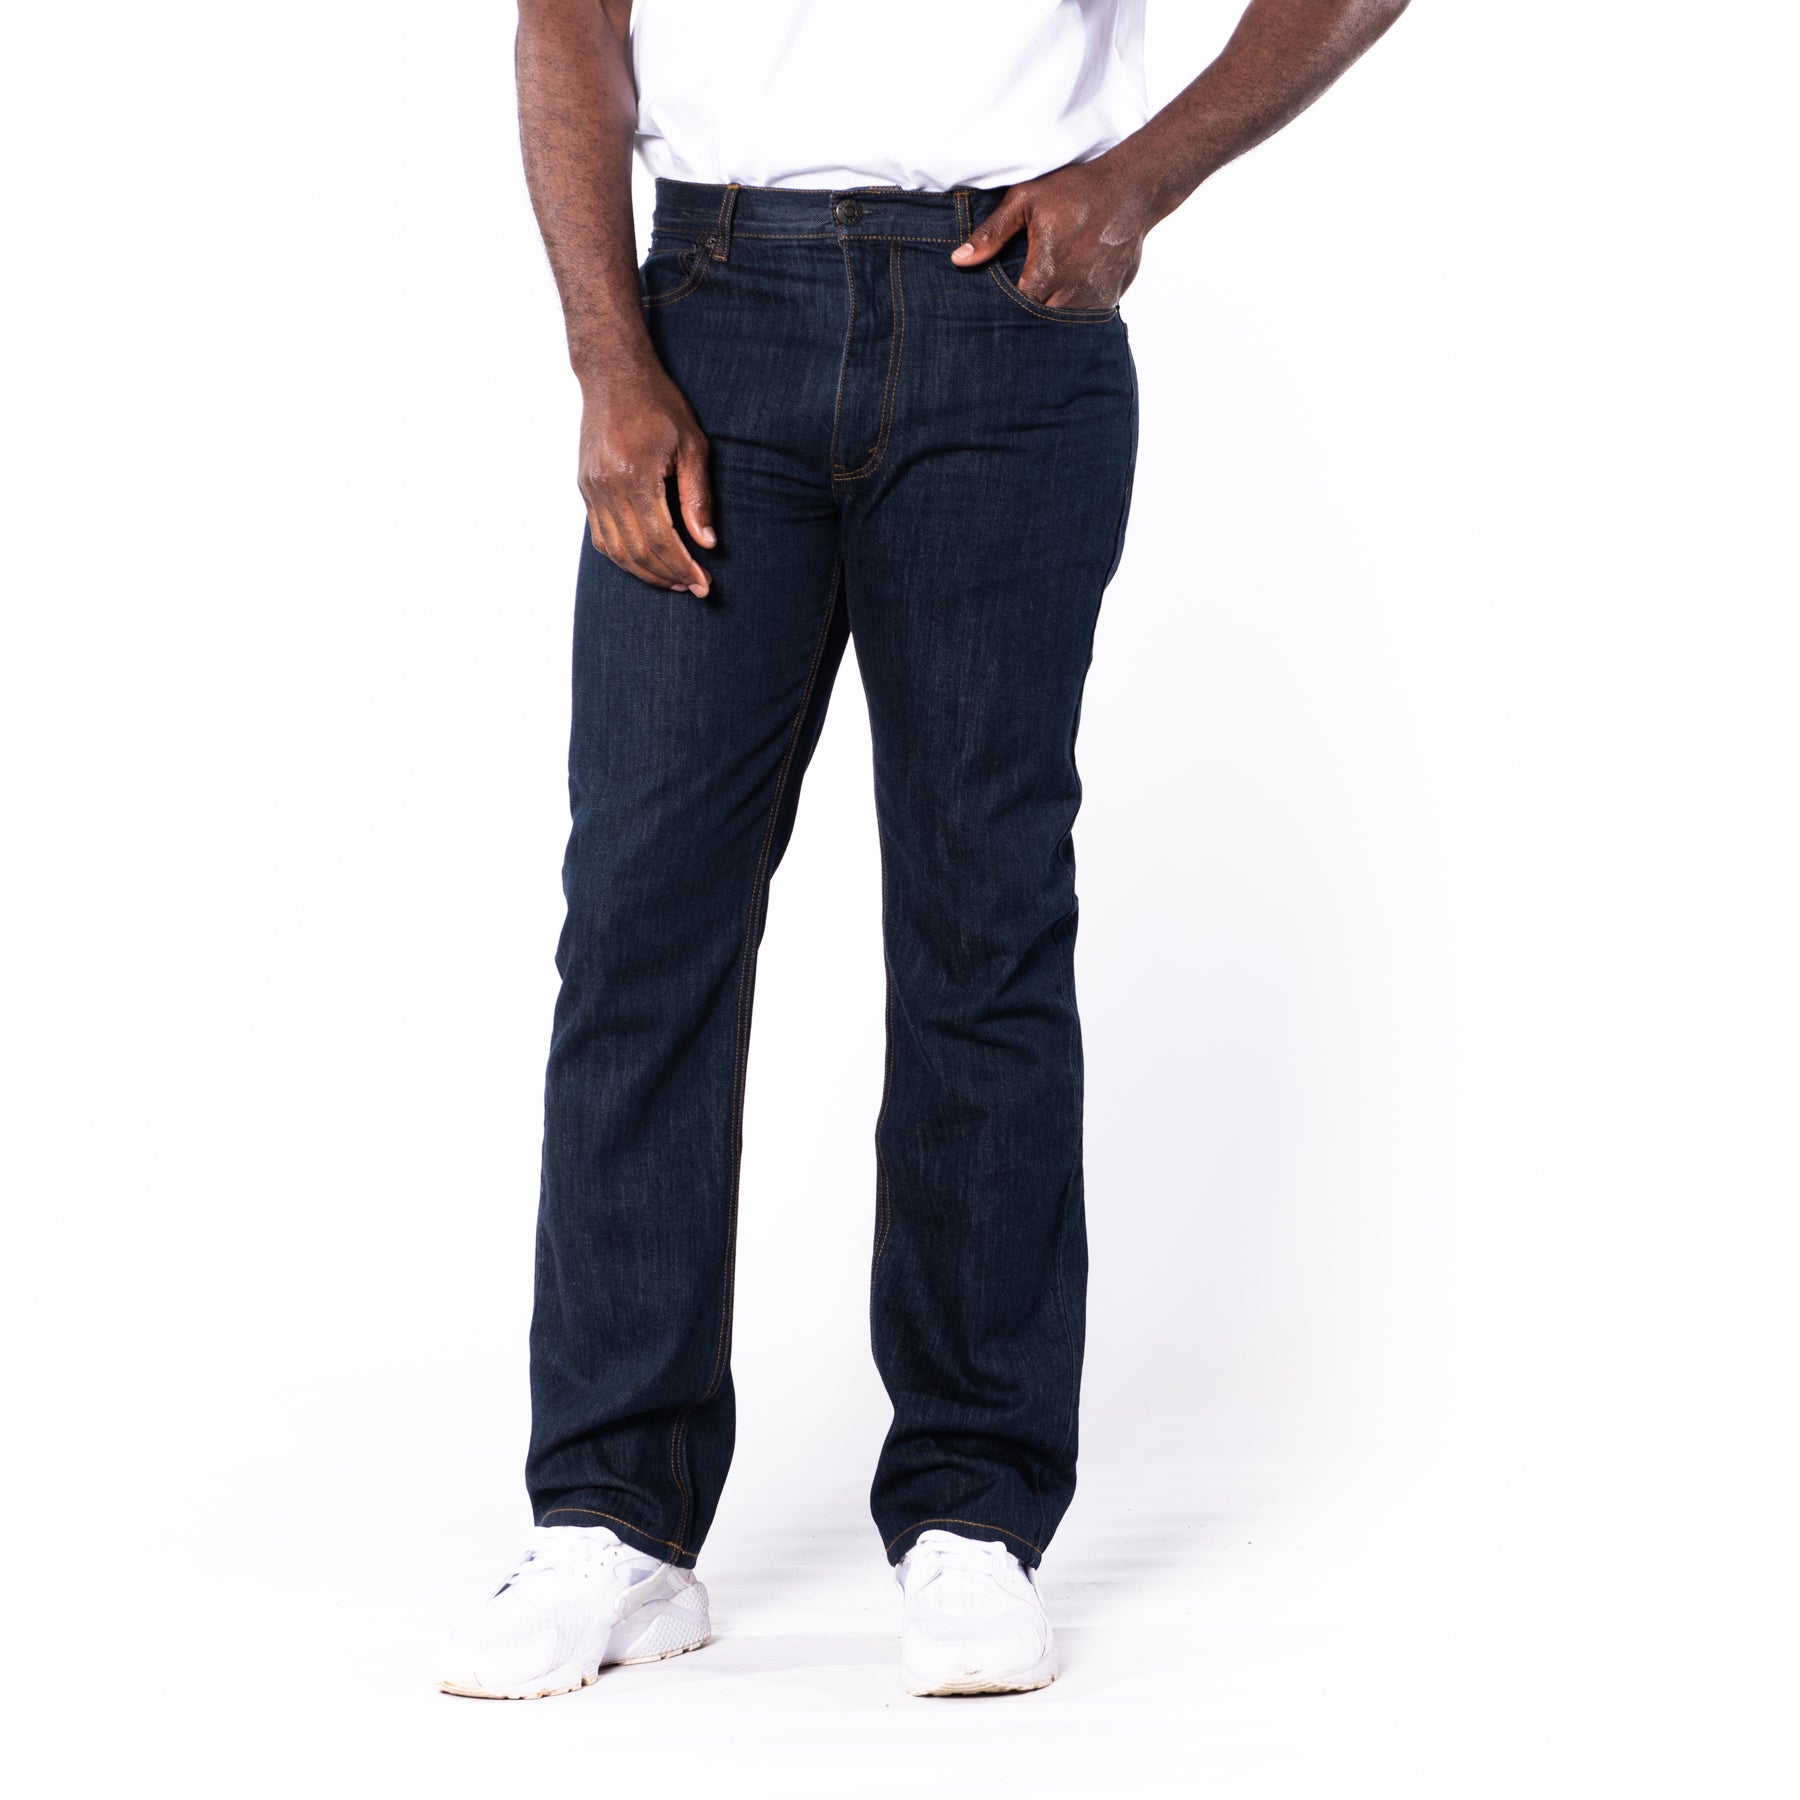 Golden Straight-Cut Jeans - OBSOLETES DO NOT TOUCH 1AAWGS